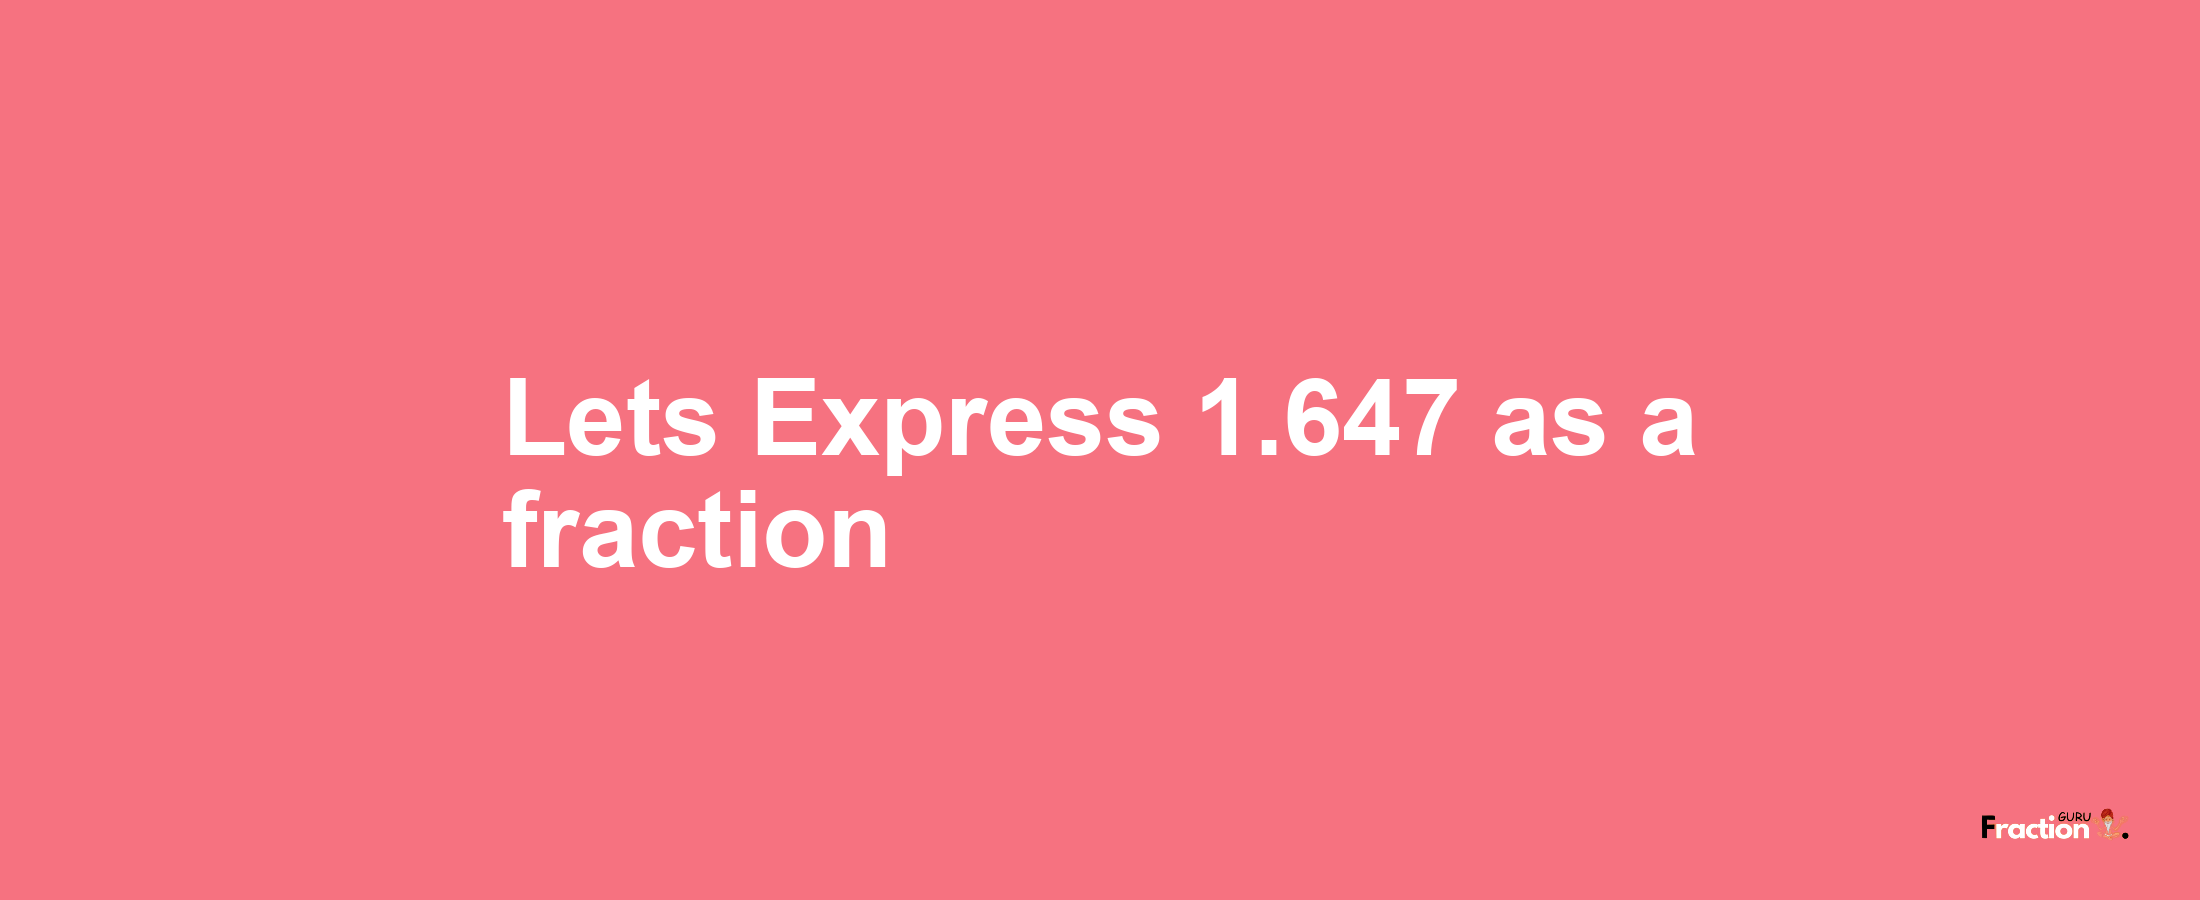 Lets Express 1.647 as afraction